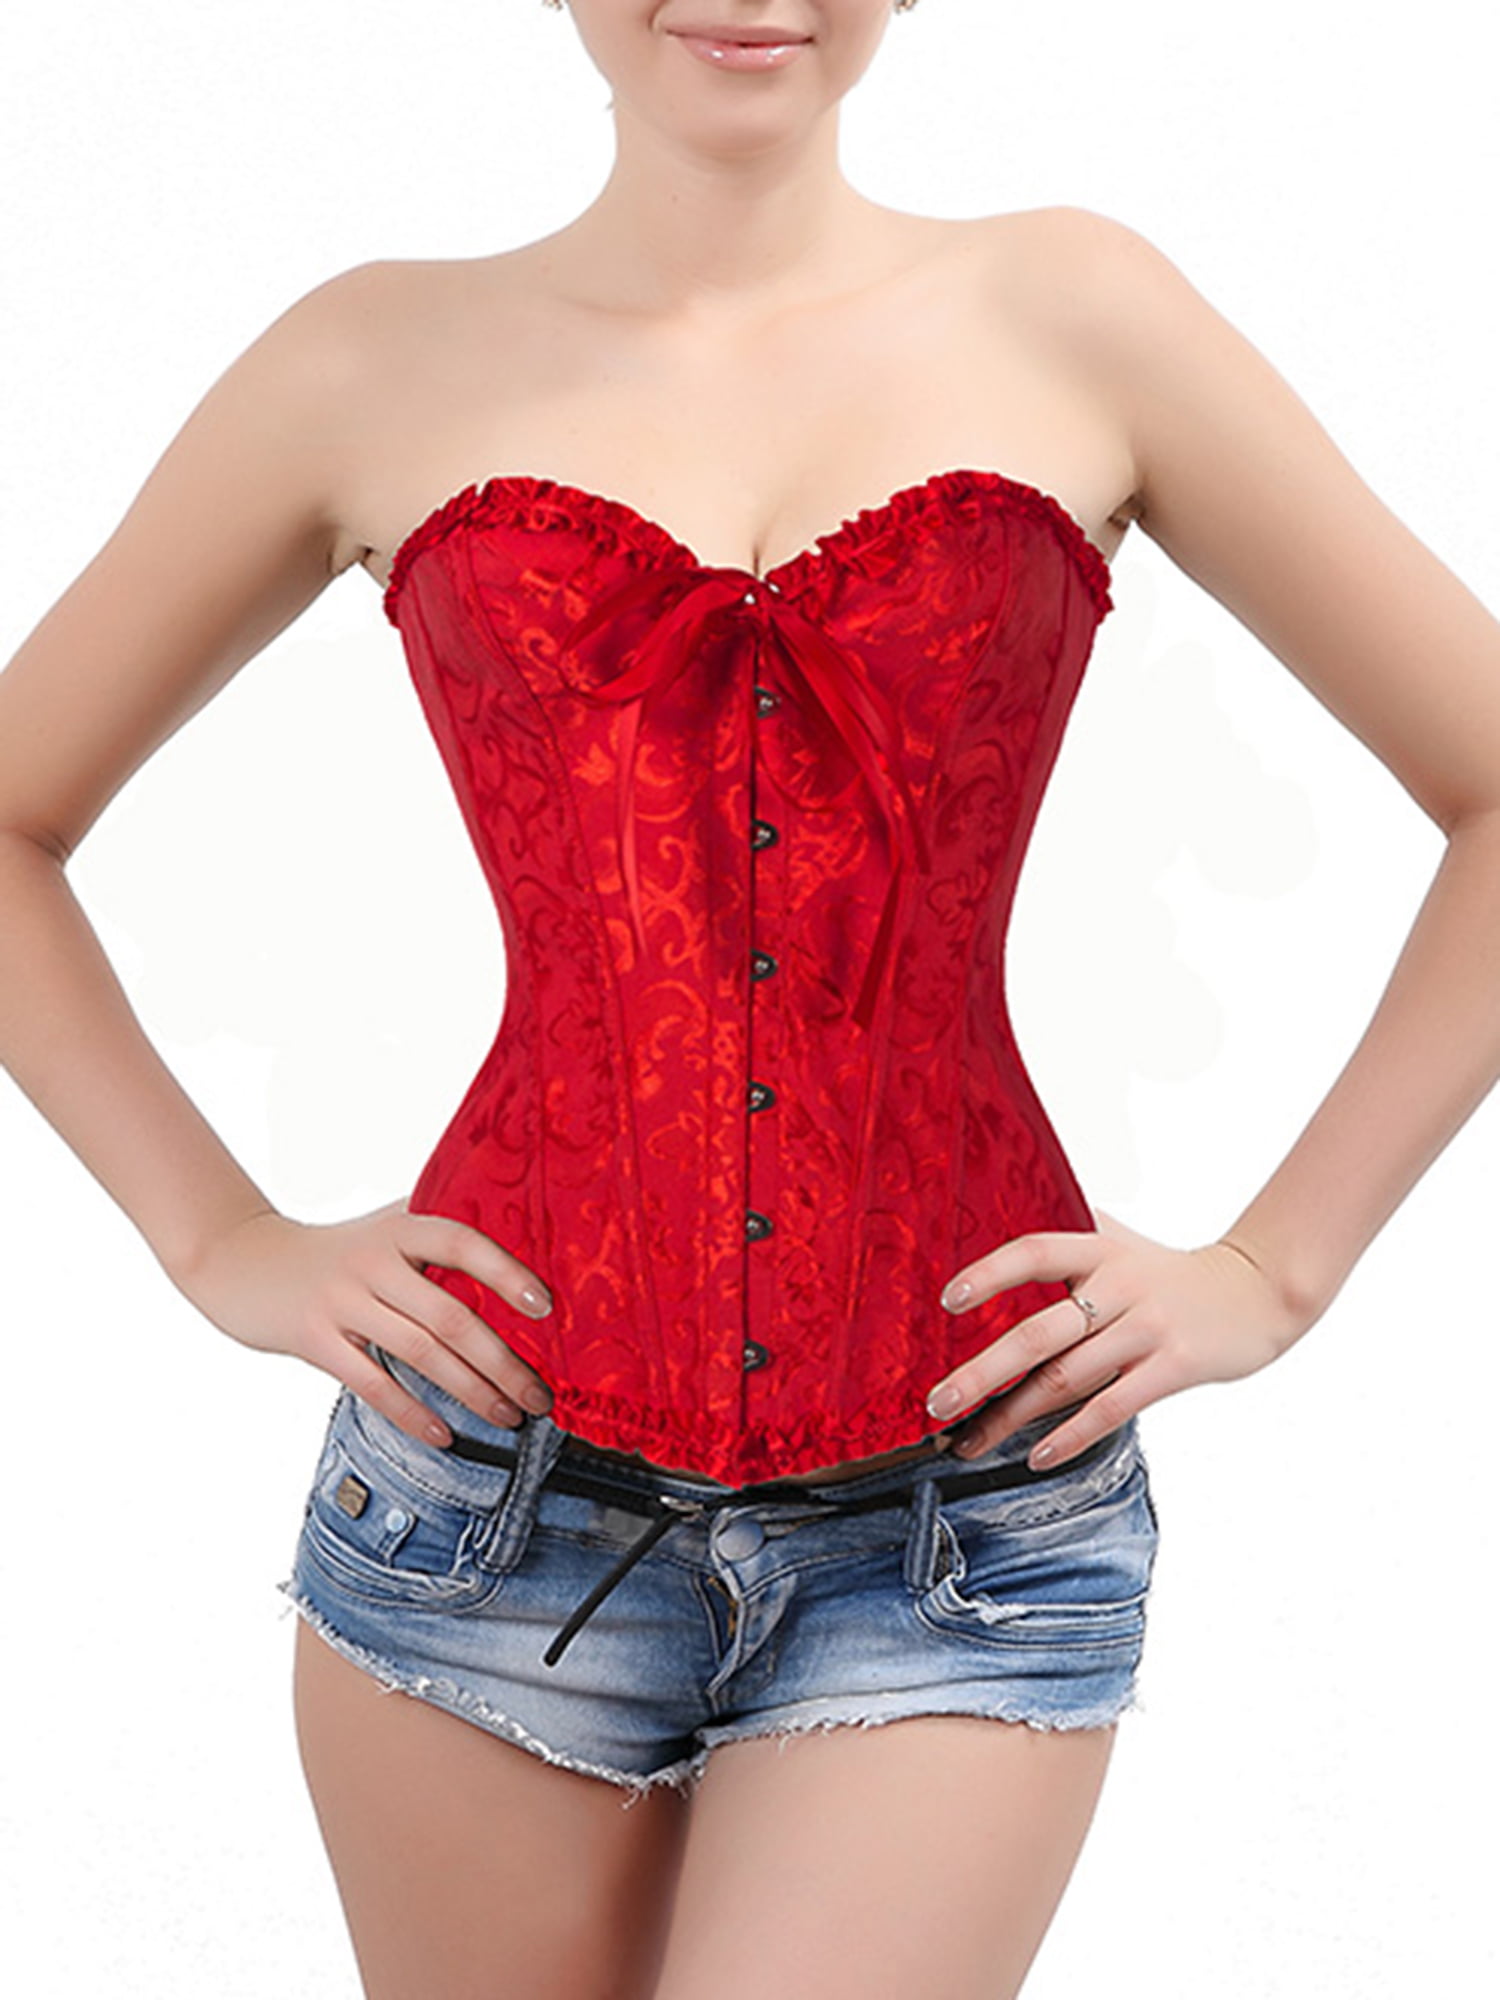 Womens Bustier Corset Top Gothic Lace Up Body Shaper Floral Overbust with Ruffled Sleeves Lace Bodysuits Lolita Style